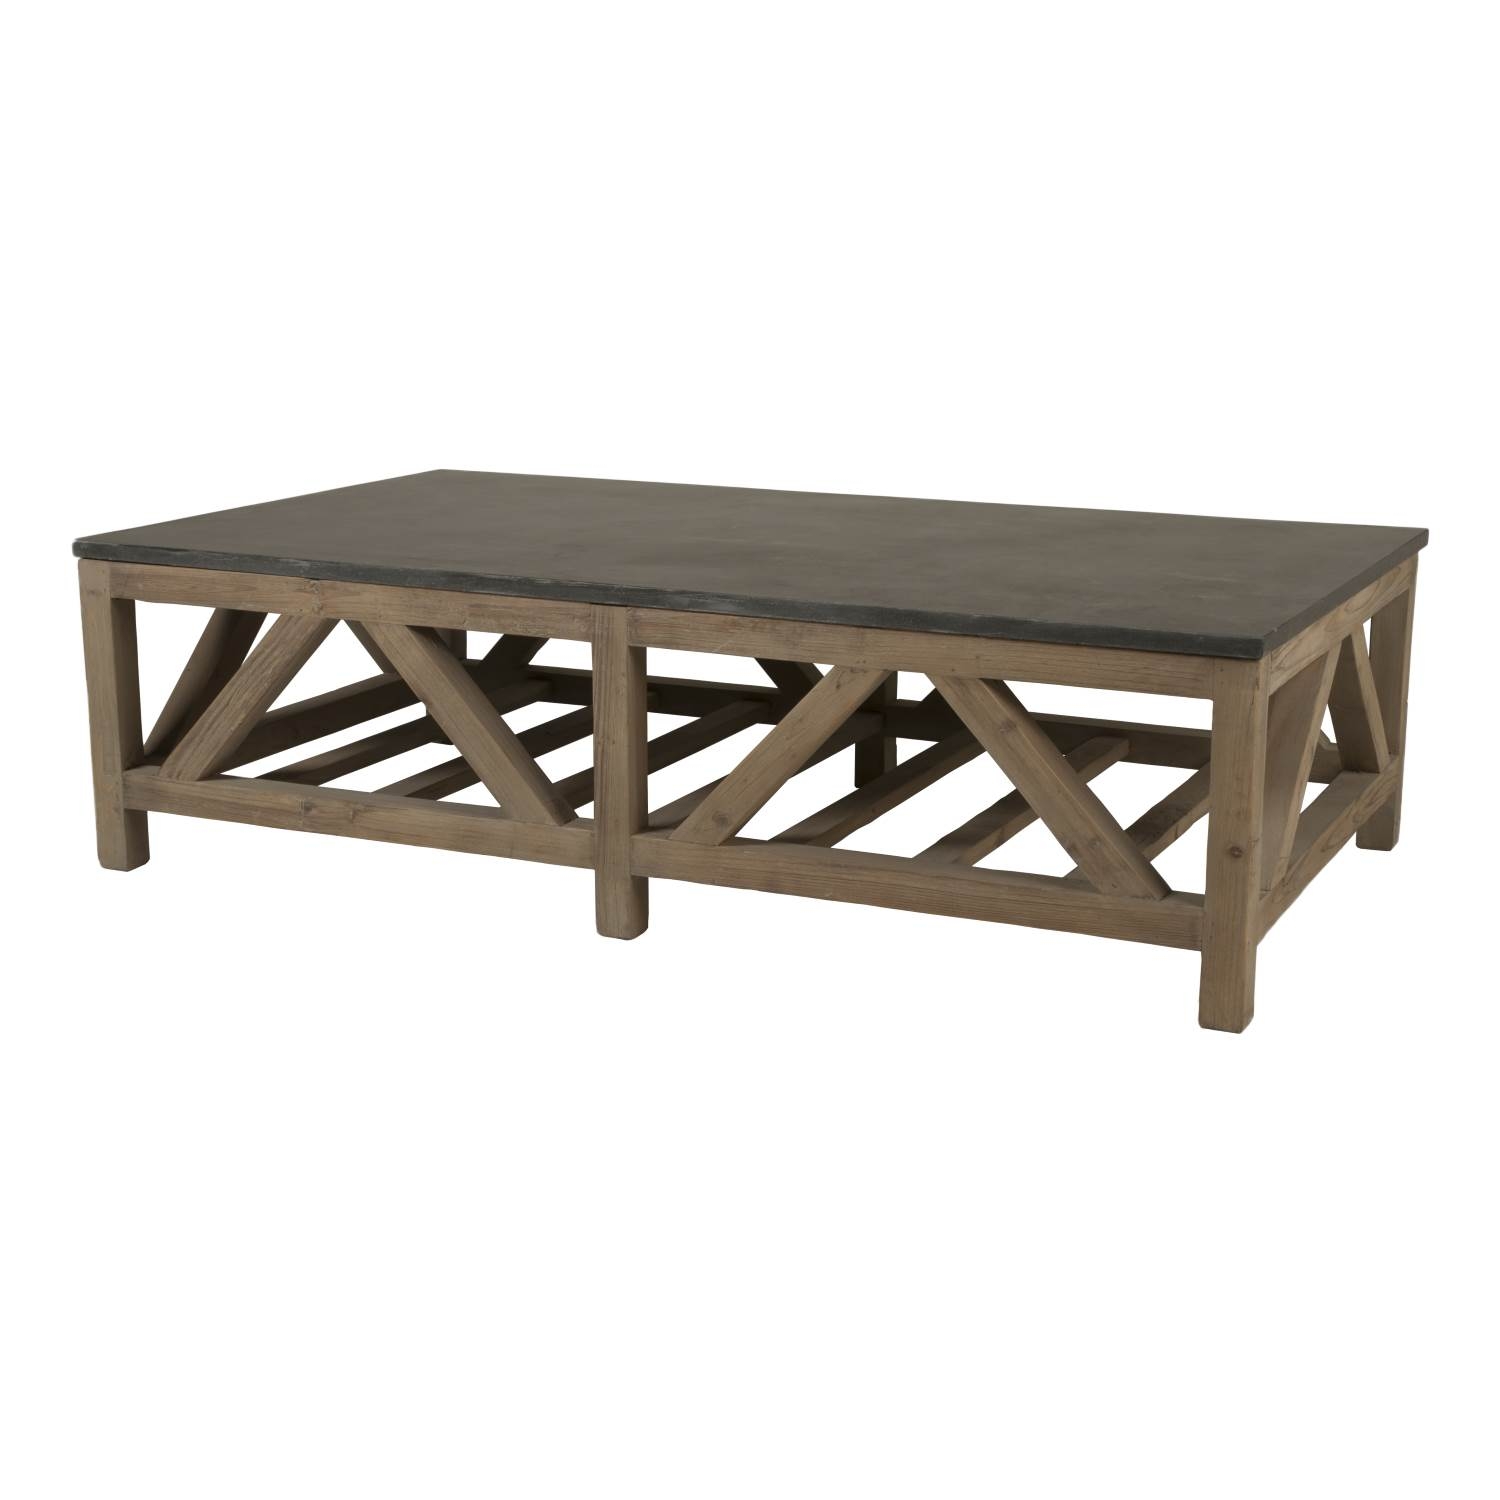 BLUE STONE COFFEE TABLE - Image 1